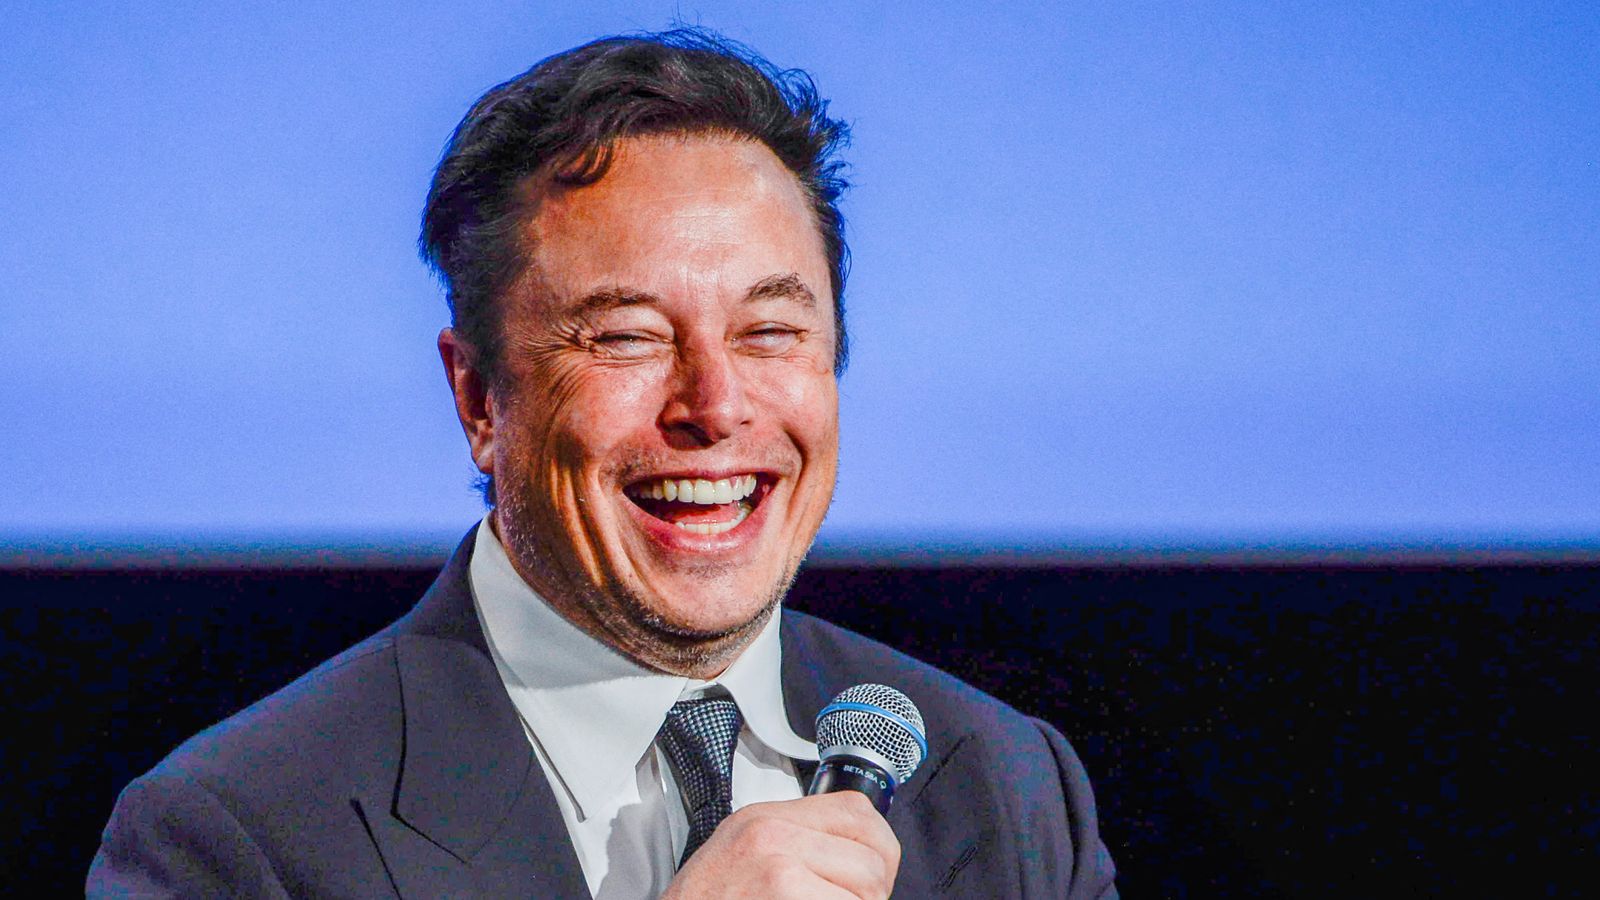 Elon Musk to set up Twitter moderation council with 'widely diverse viewpoints'